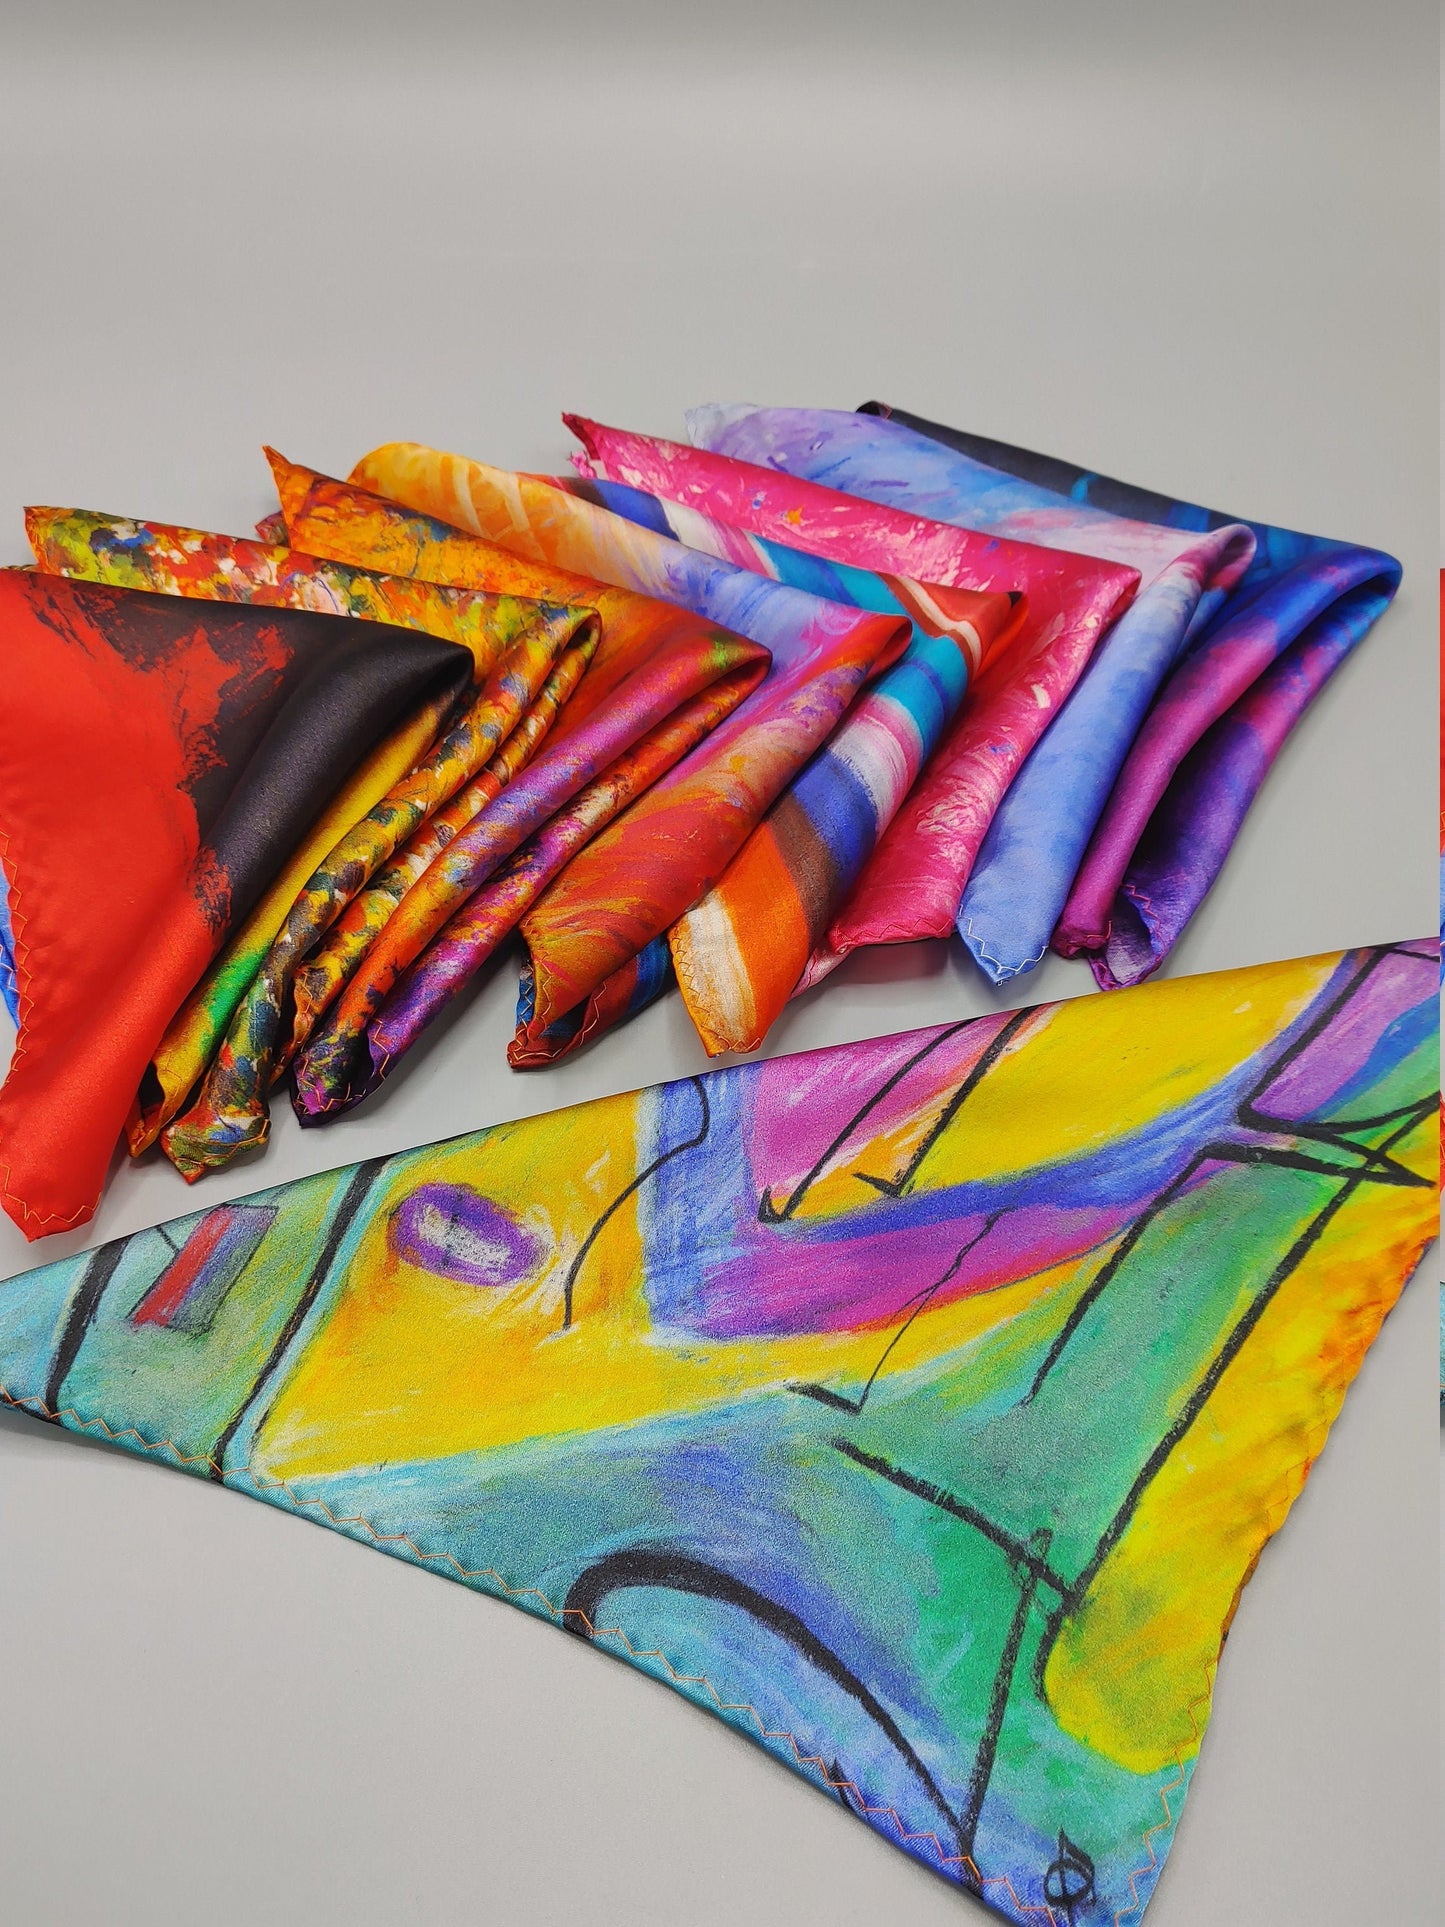 100% Silk handkerchief scarf pocket square print inspired by Bruce Mishell